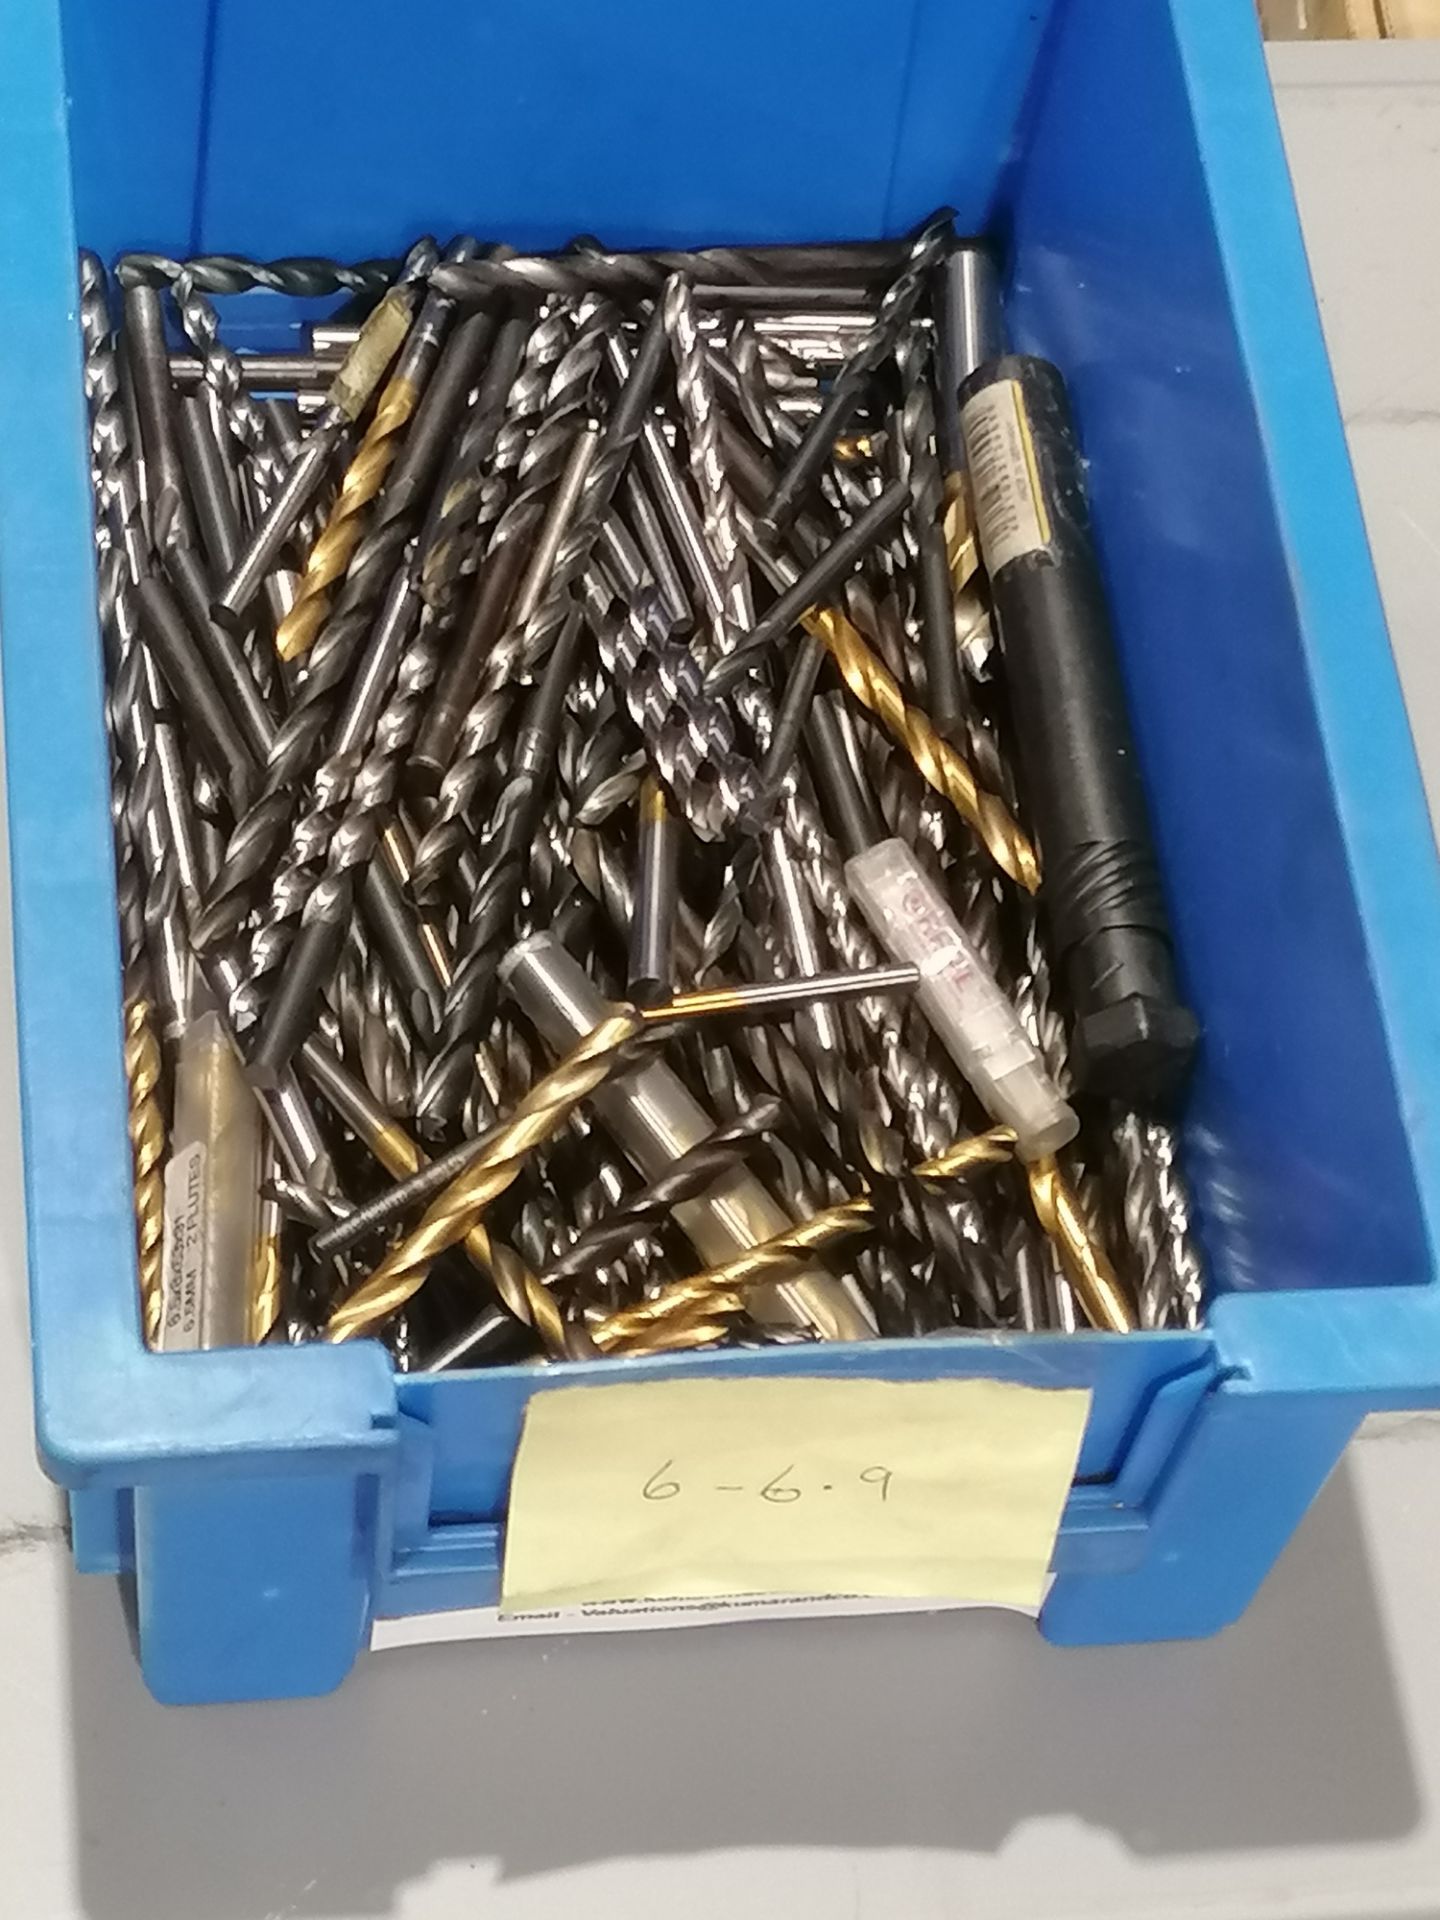 Assorted Drills 6mm-6.9mm Diameter (Please Note: Plastic Container Boxes Are Not Included) - Image 2 of 4